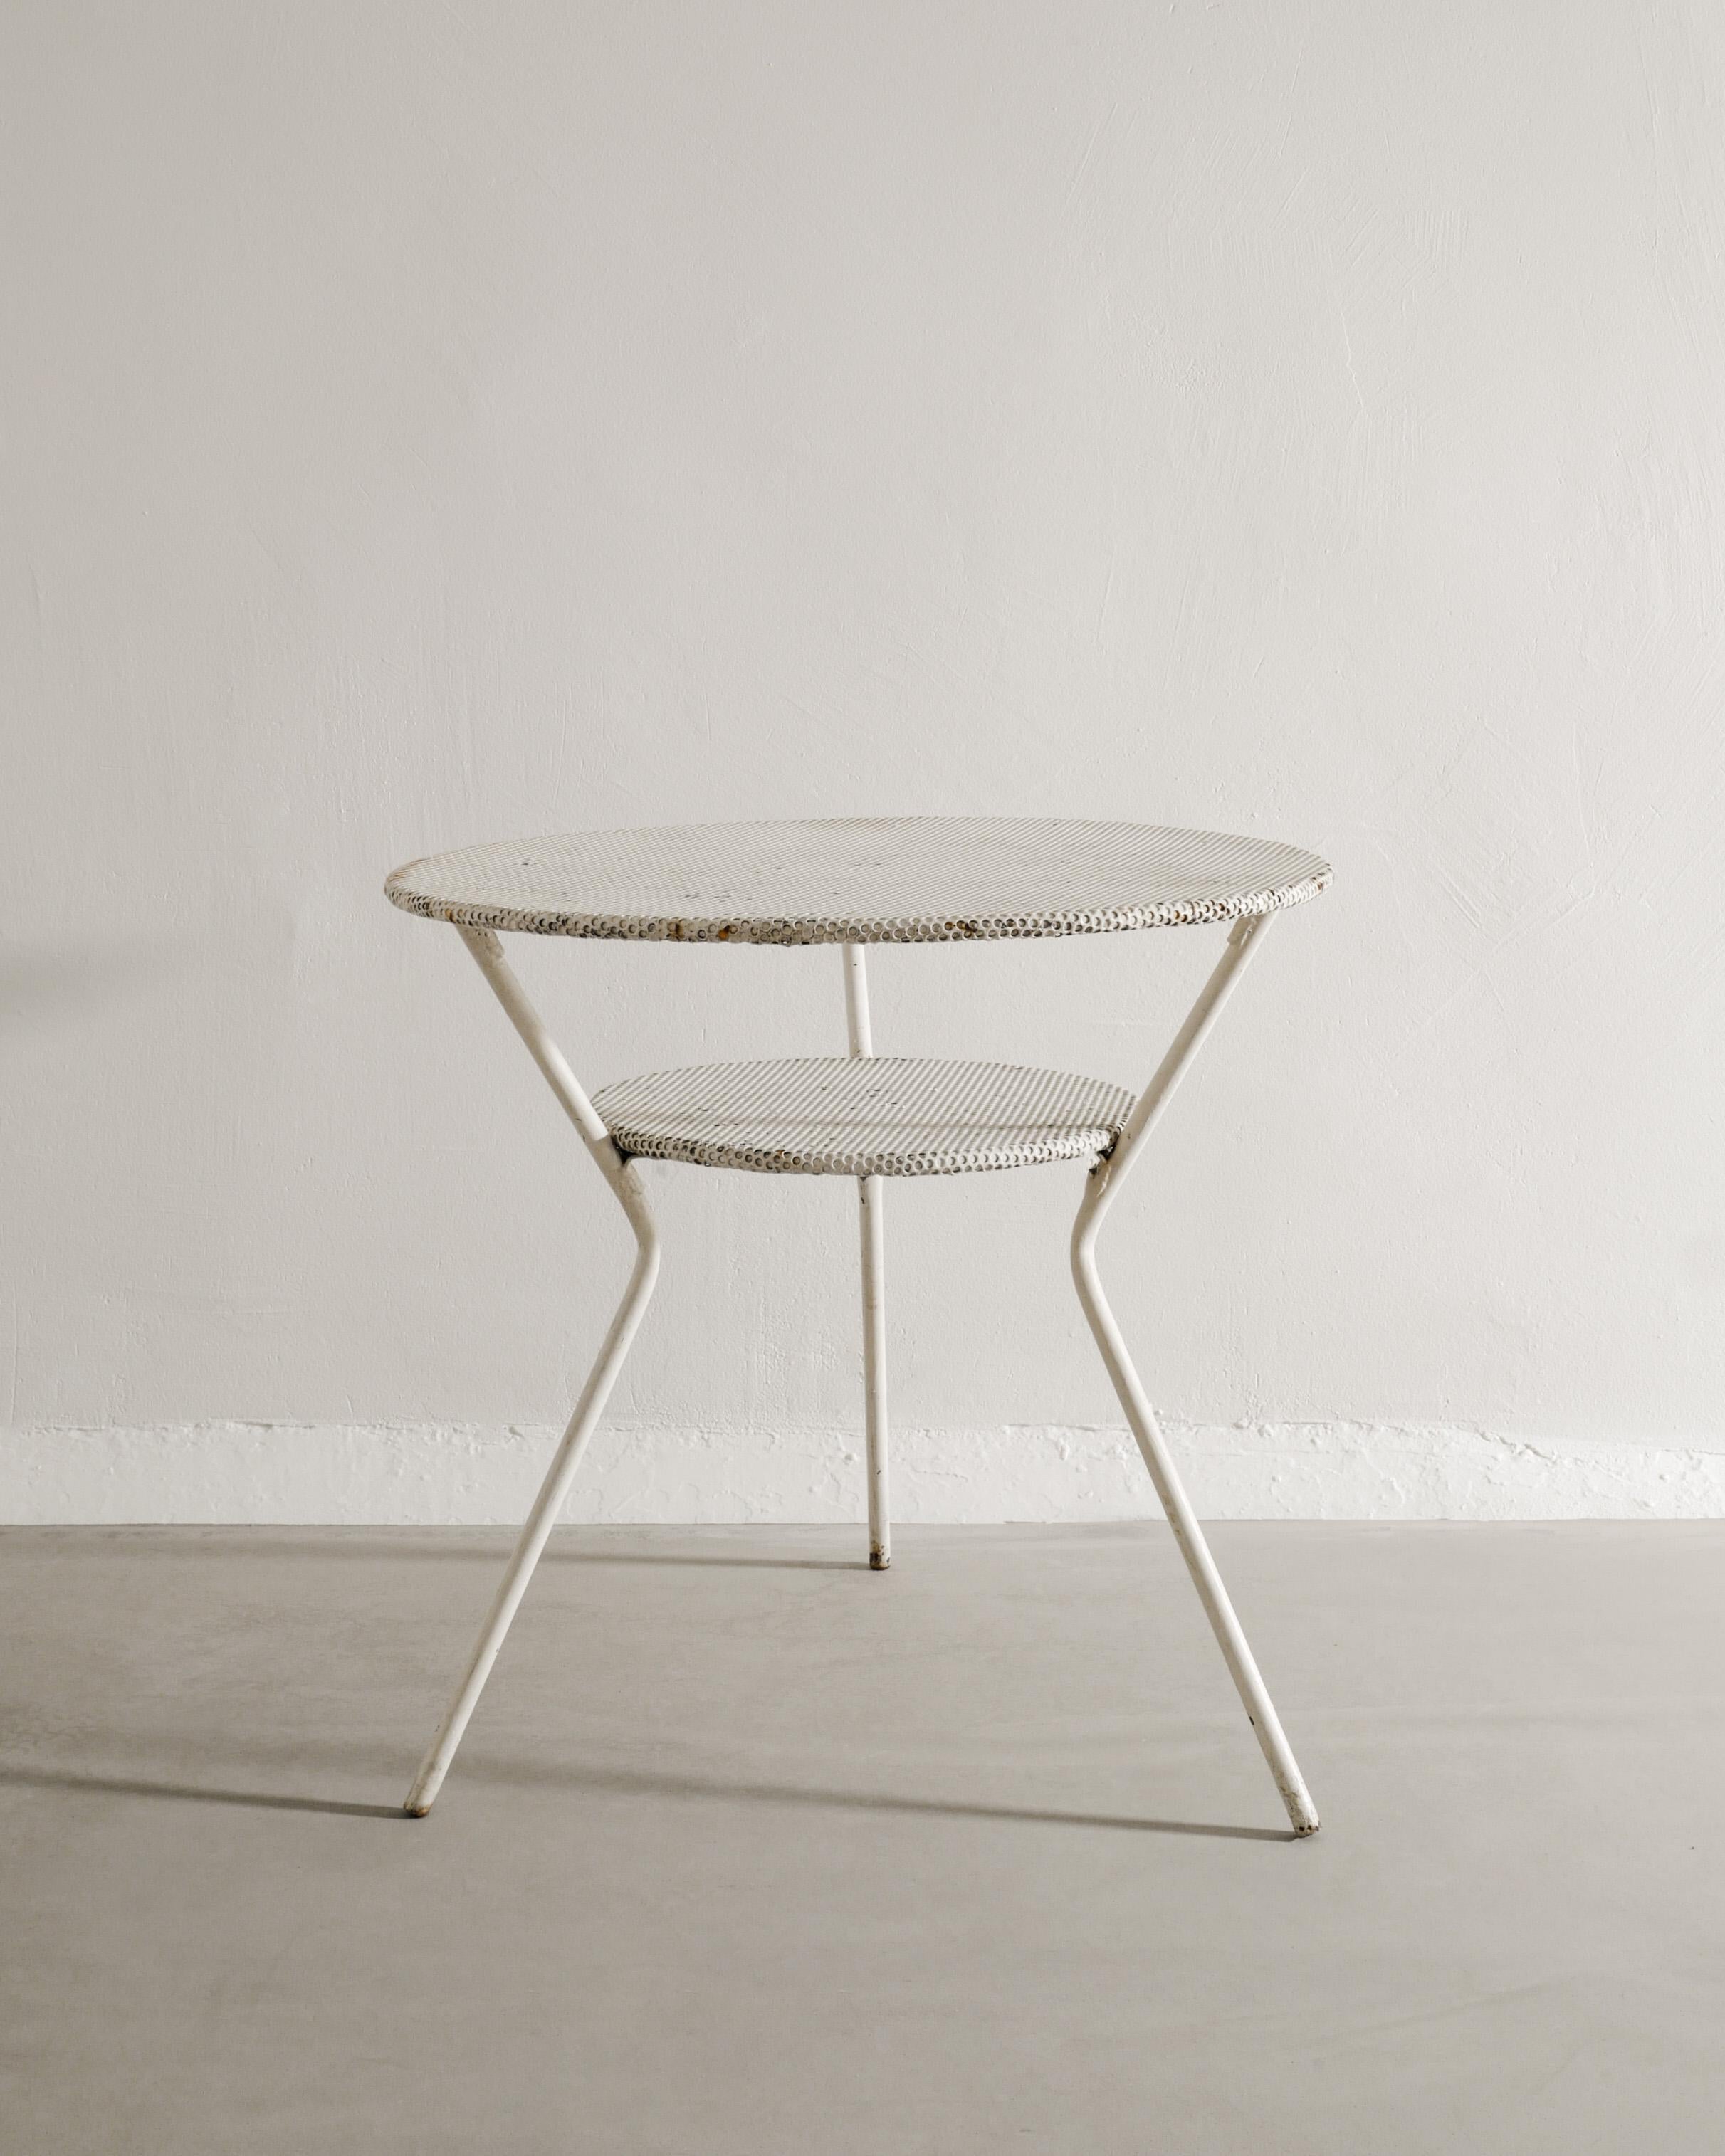 Rare mid century round dining garden table in white lacquered metal in style of Mathieu Matégot. Produced in France, 1950s. In good original condition. 

Dimensions: H: 65 cm / 25.60